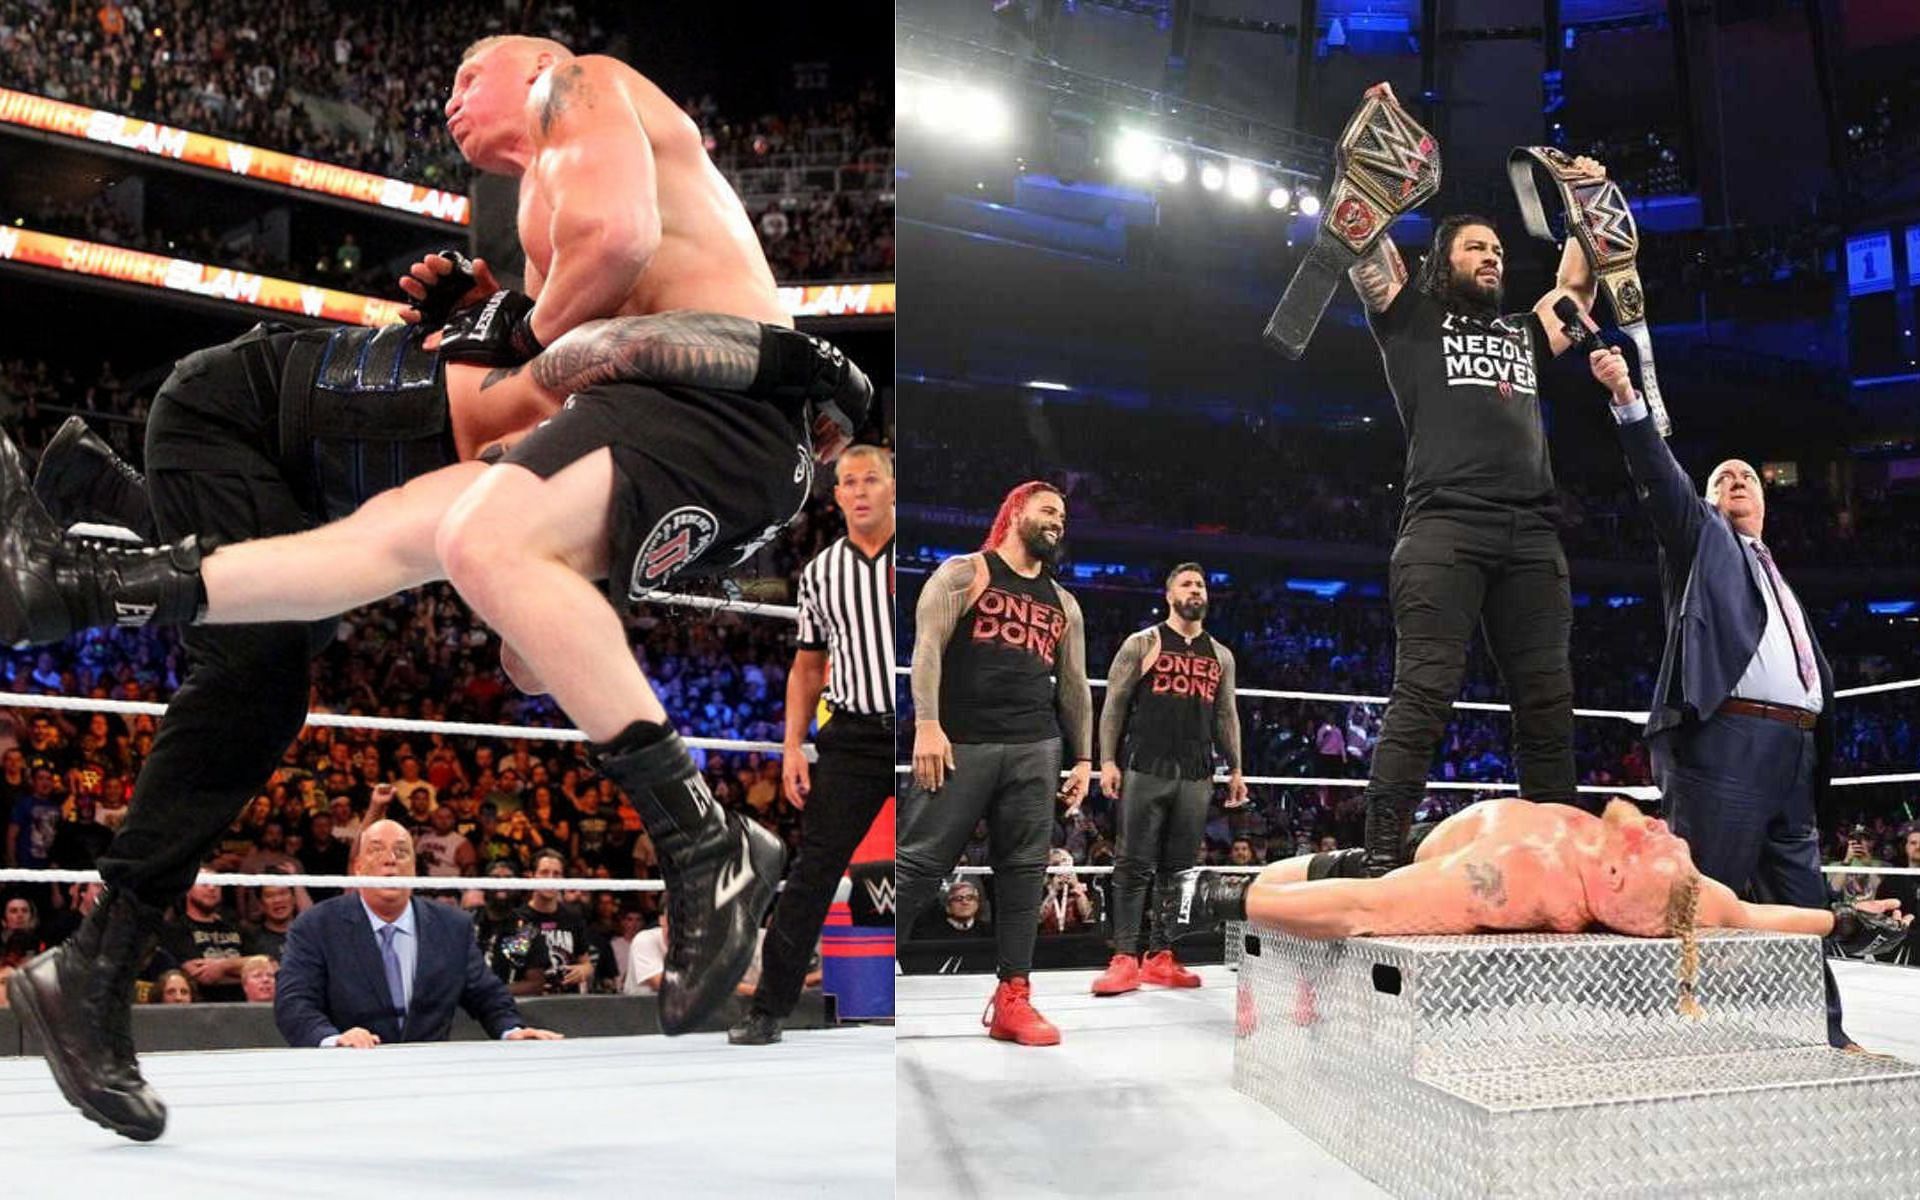 Roman Reigns is the favorite to win against Brock Lesnar at SummerSlam 2022